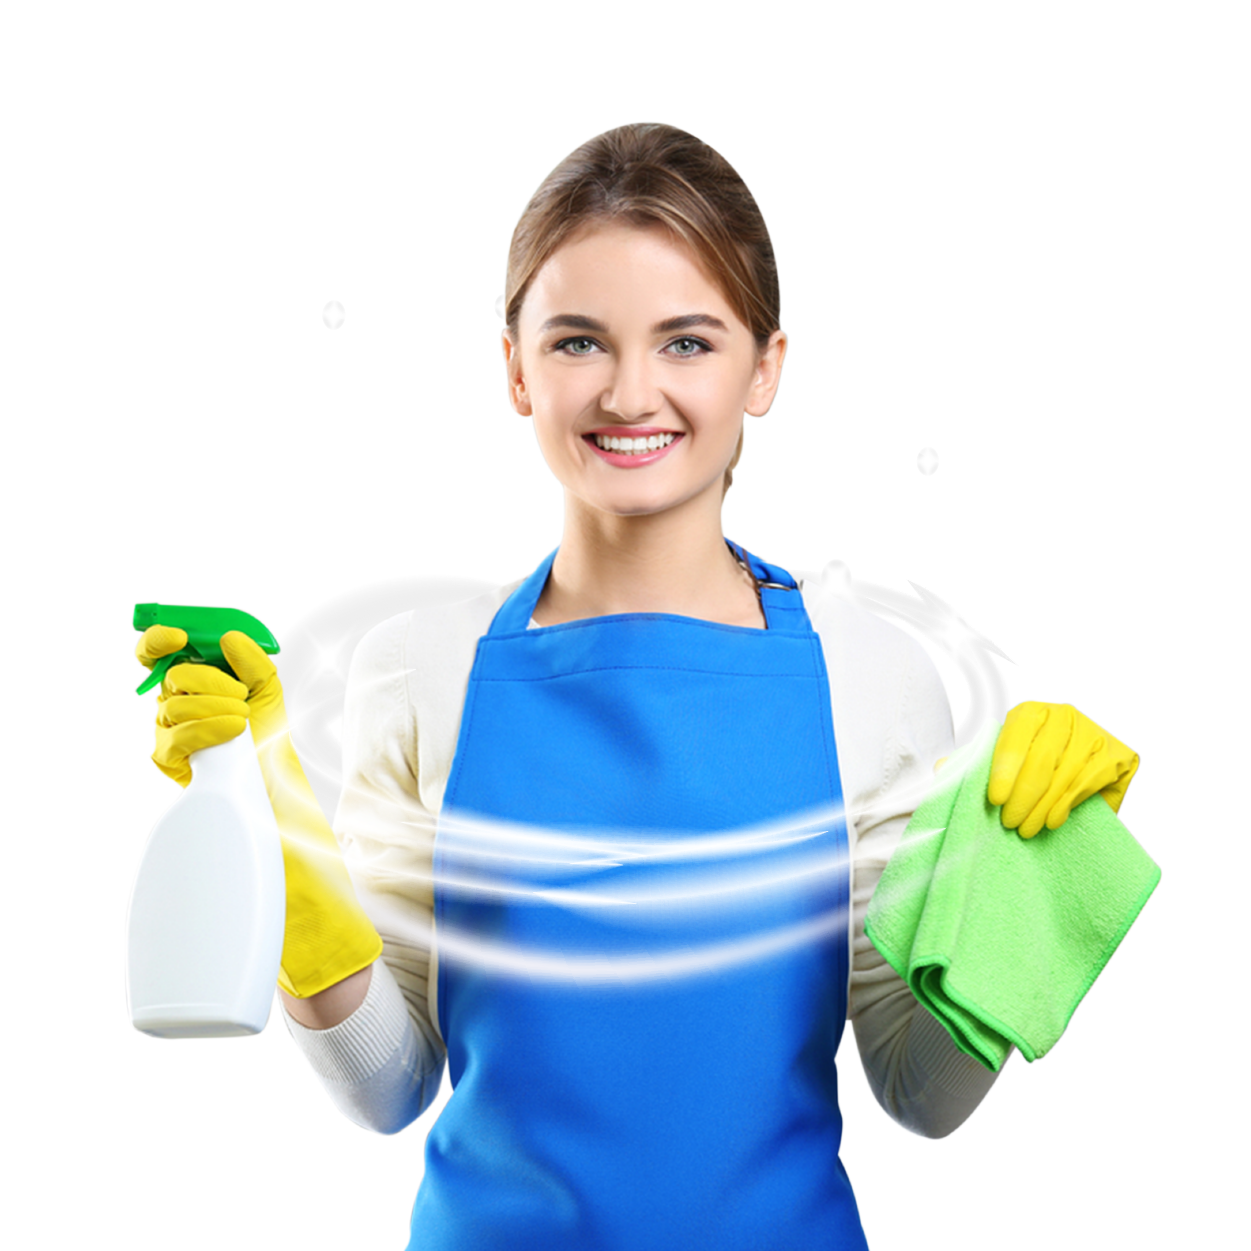 Know before booking our strata regular cleaning services: